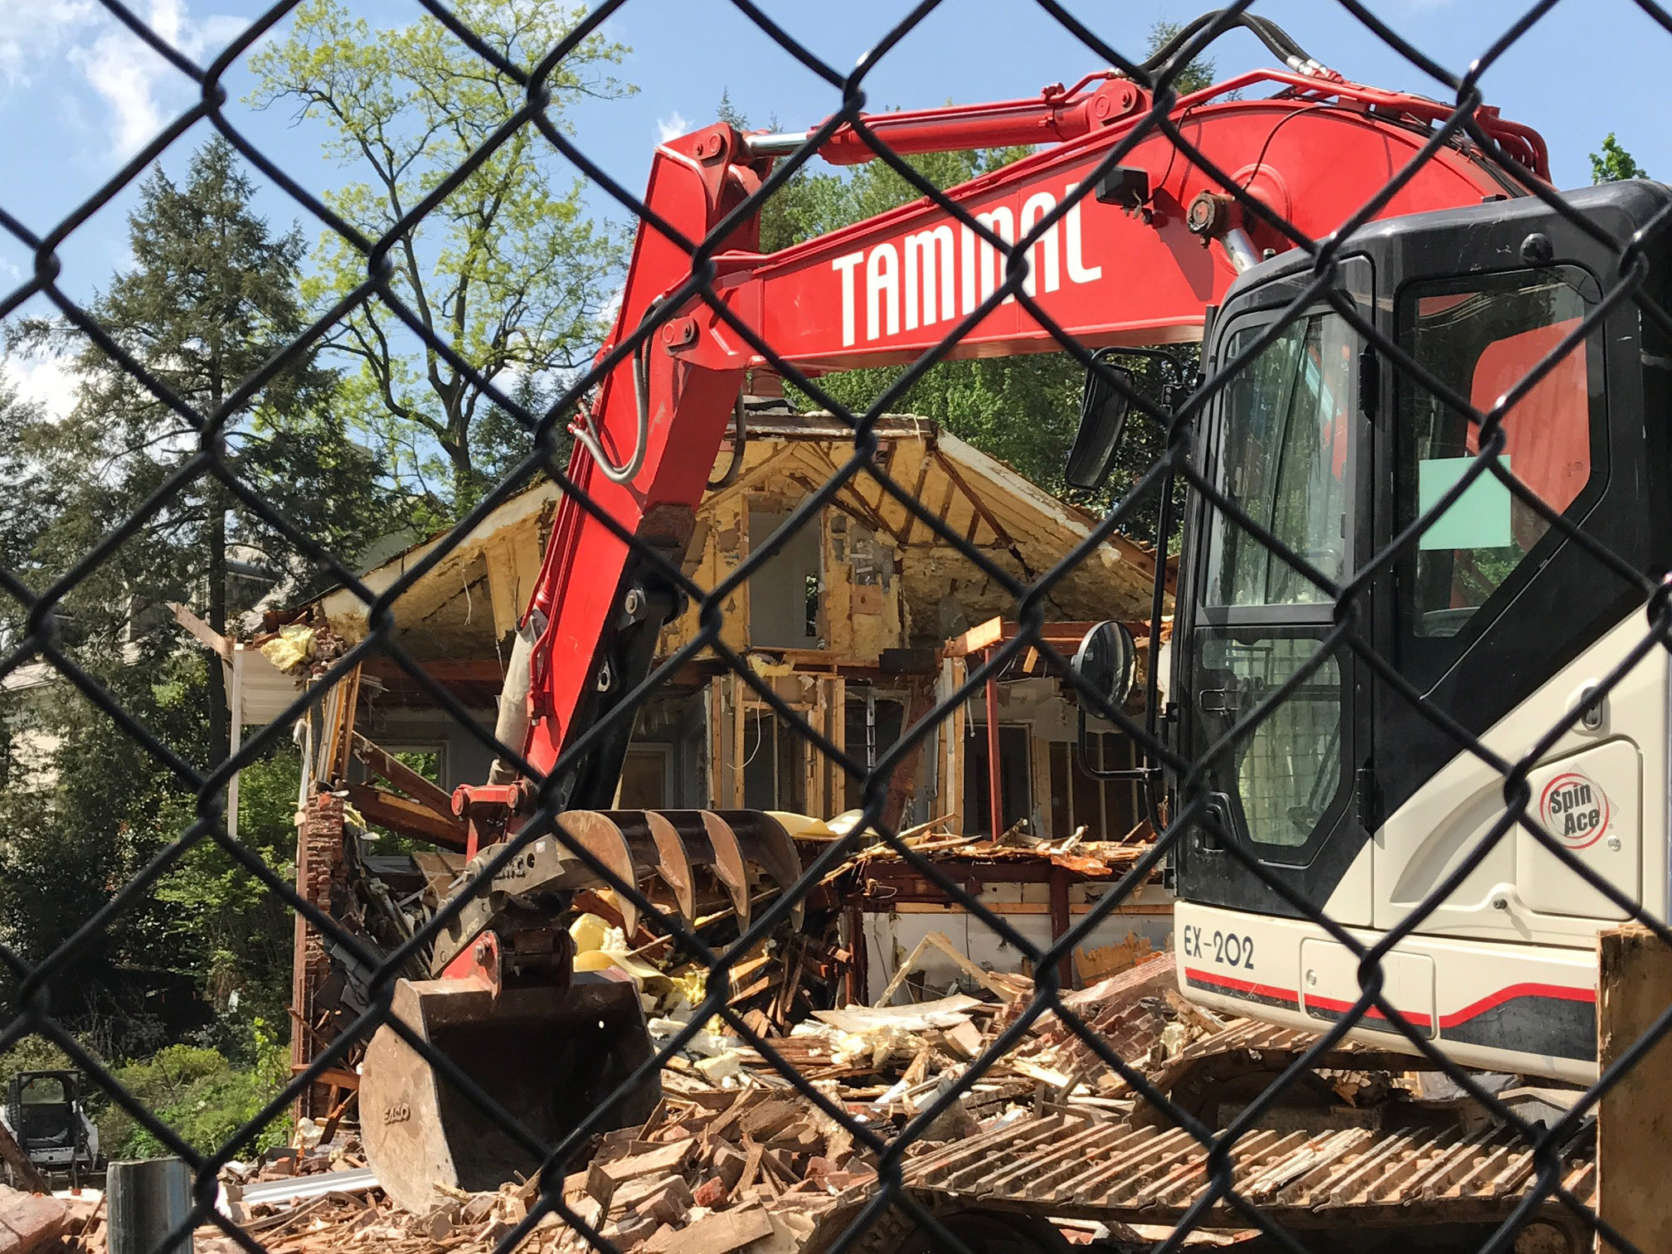 Construction crews tear down a posh D.C. house that was the scene of a 2015 quadruple homicide on Friday, April 21, 2017. The house sold for $3 million months after Savvas and Amy Savopoulos, their son Philip and housekeeper Vera Figueroa were killed. (WTOP/Megan Cloherty)